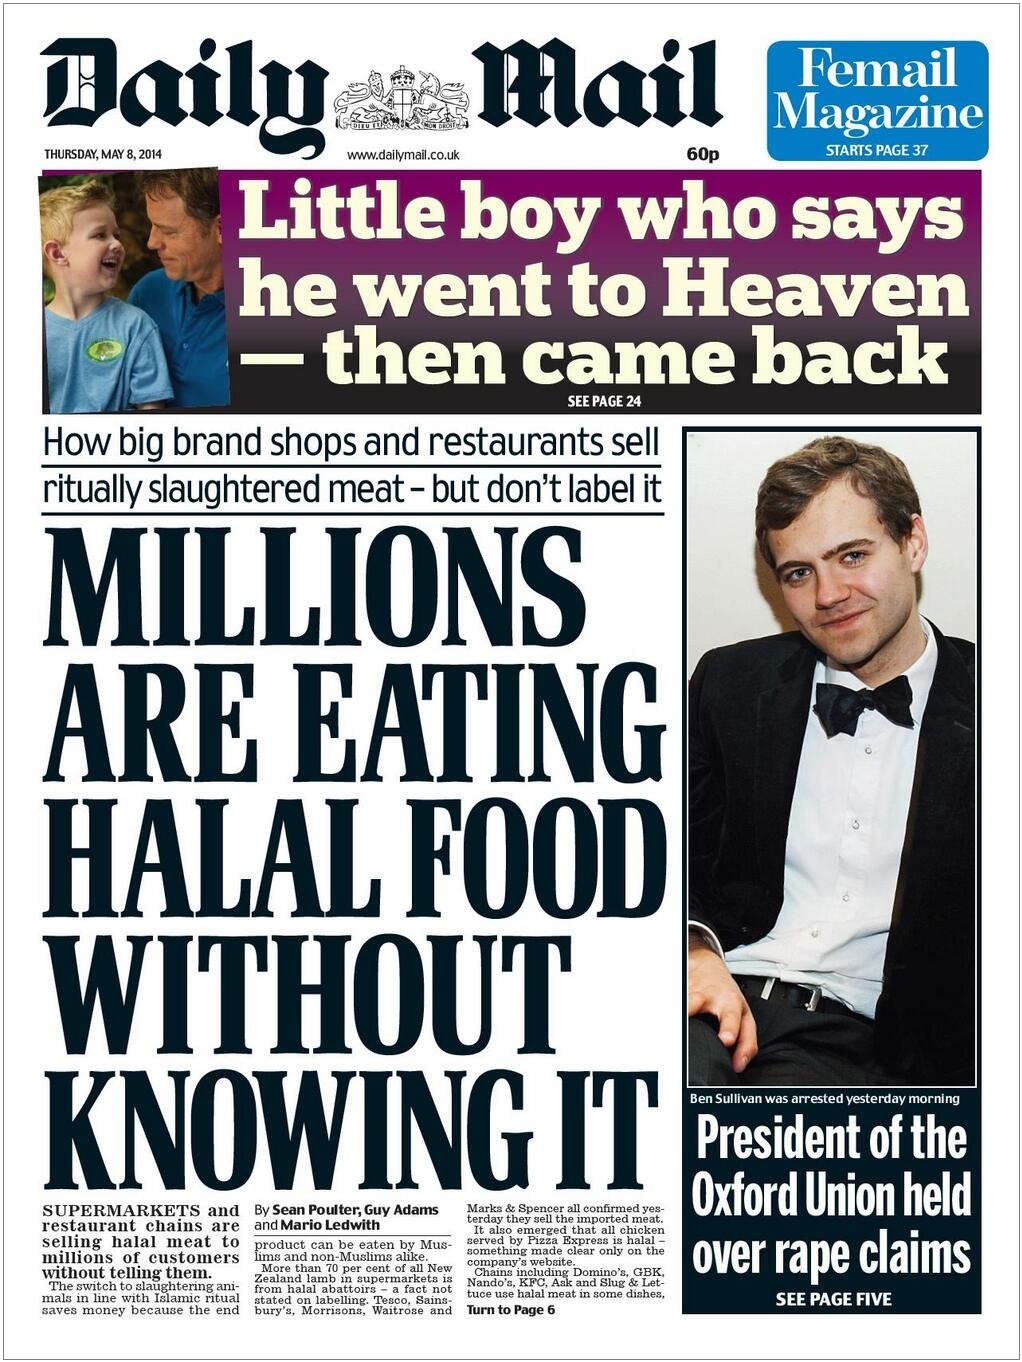 Daily Mail Millions Are Eating Halal Food front page